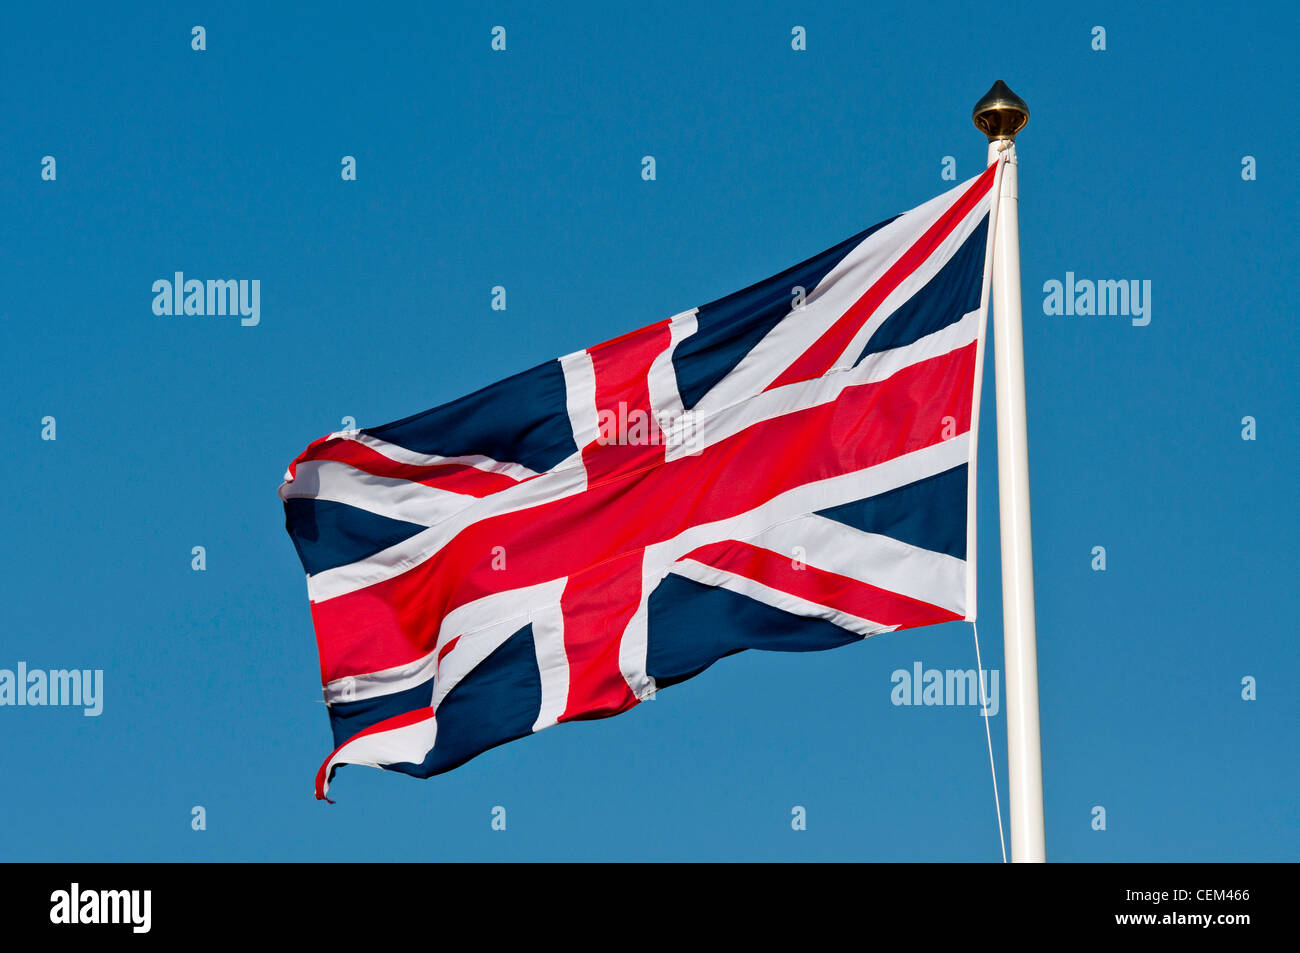 A union jack flag flying against a clear bright blue sky. Stock Photo